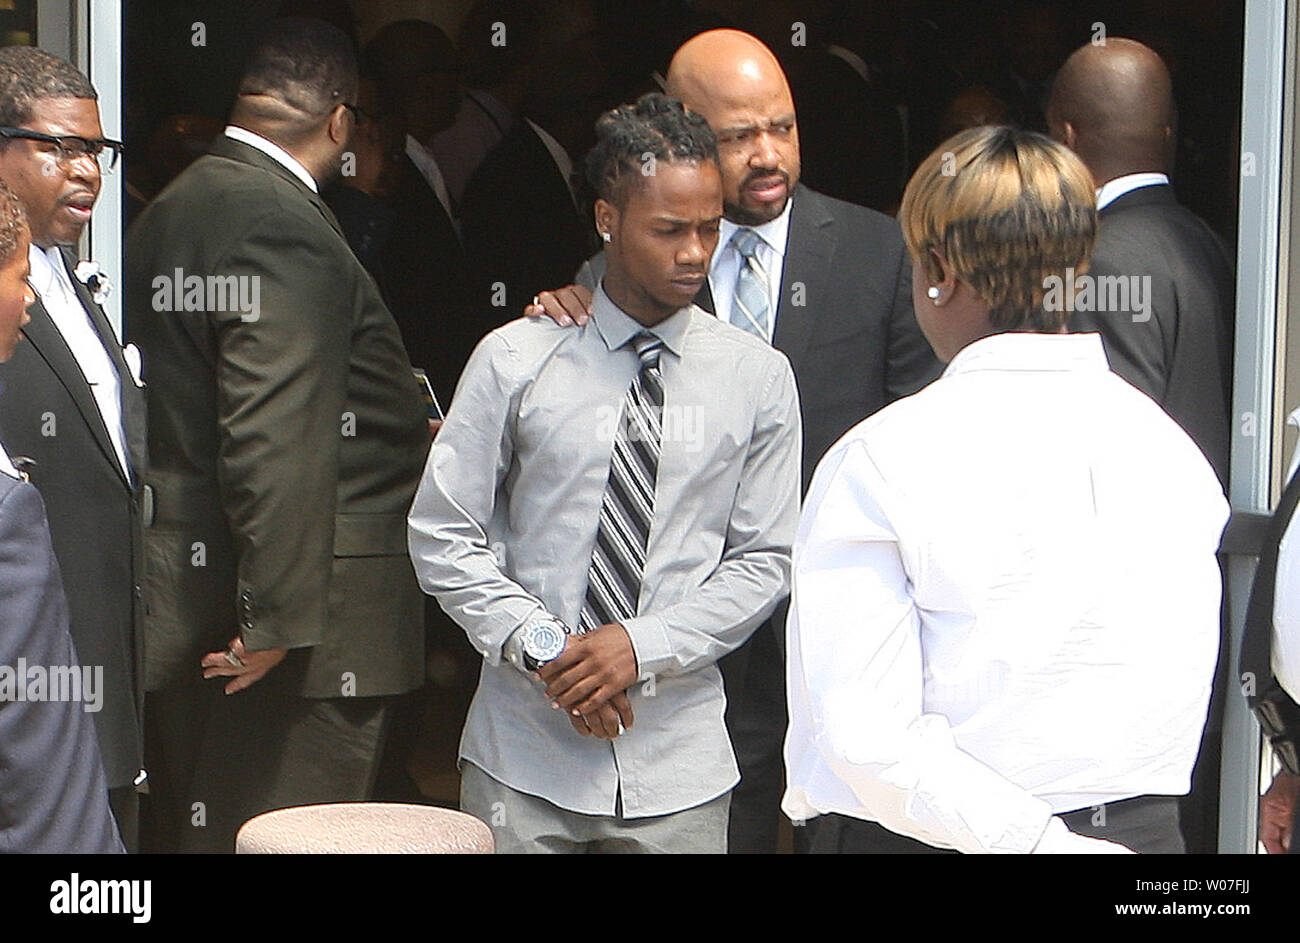 Dorian Johnson, 22, leaves the funeral of friend Michael Brown at the Friendly Temple Missionary Baptist Church in St. Louis on August 25, 2014. Johnson was with Brown when he was shot by a white Ferguson, Missouri police officer on August 9. The shooting led to several nights of looting, arrests and heavy police presence.   UPI/Bill Greenblatt Stock Photo